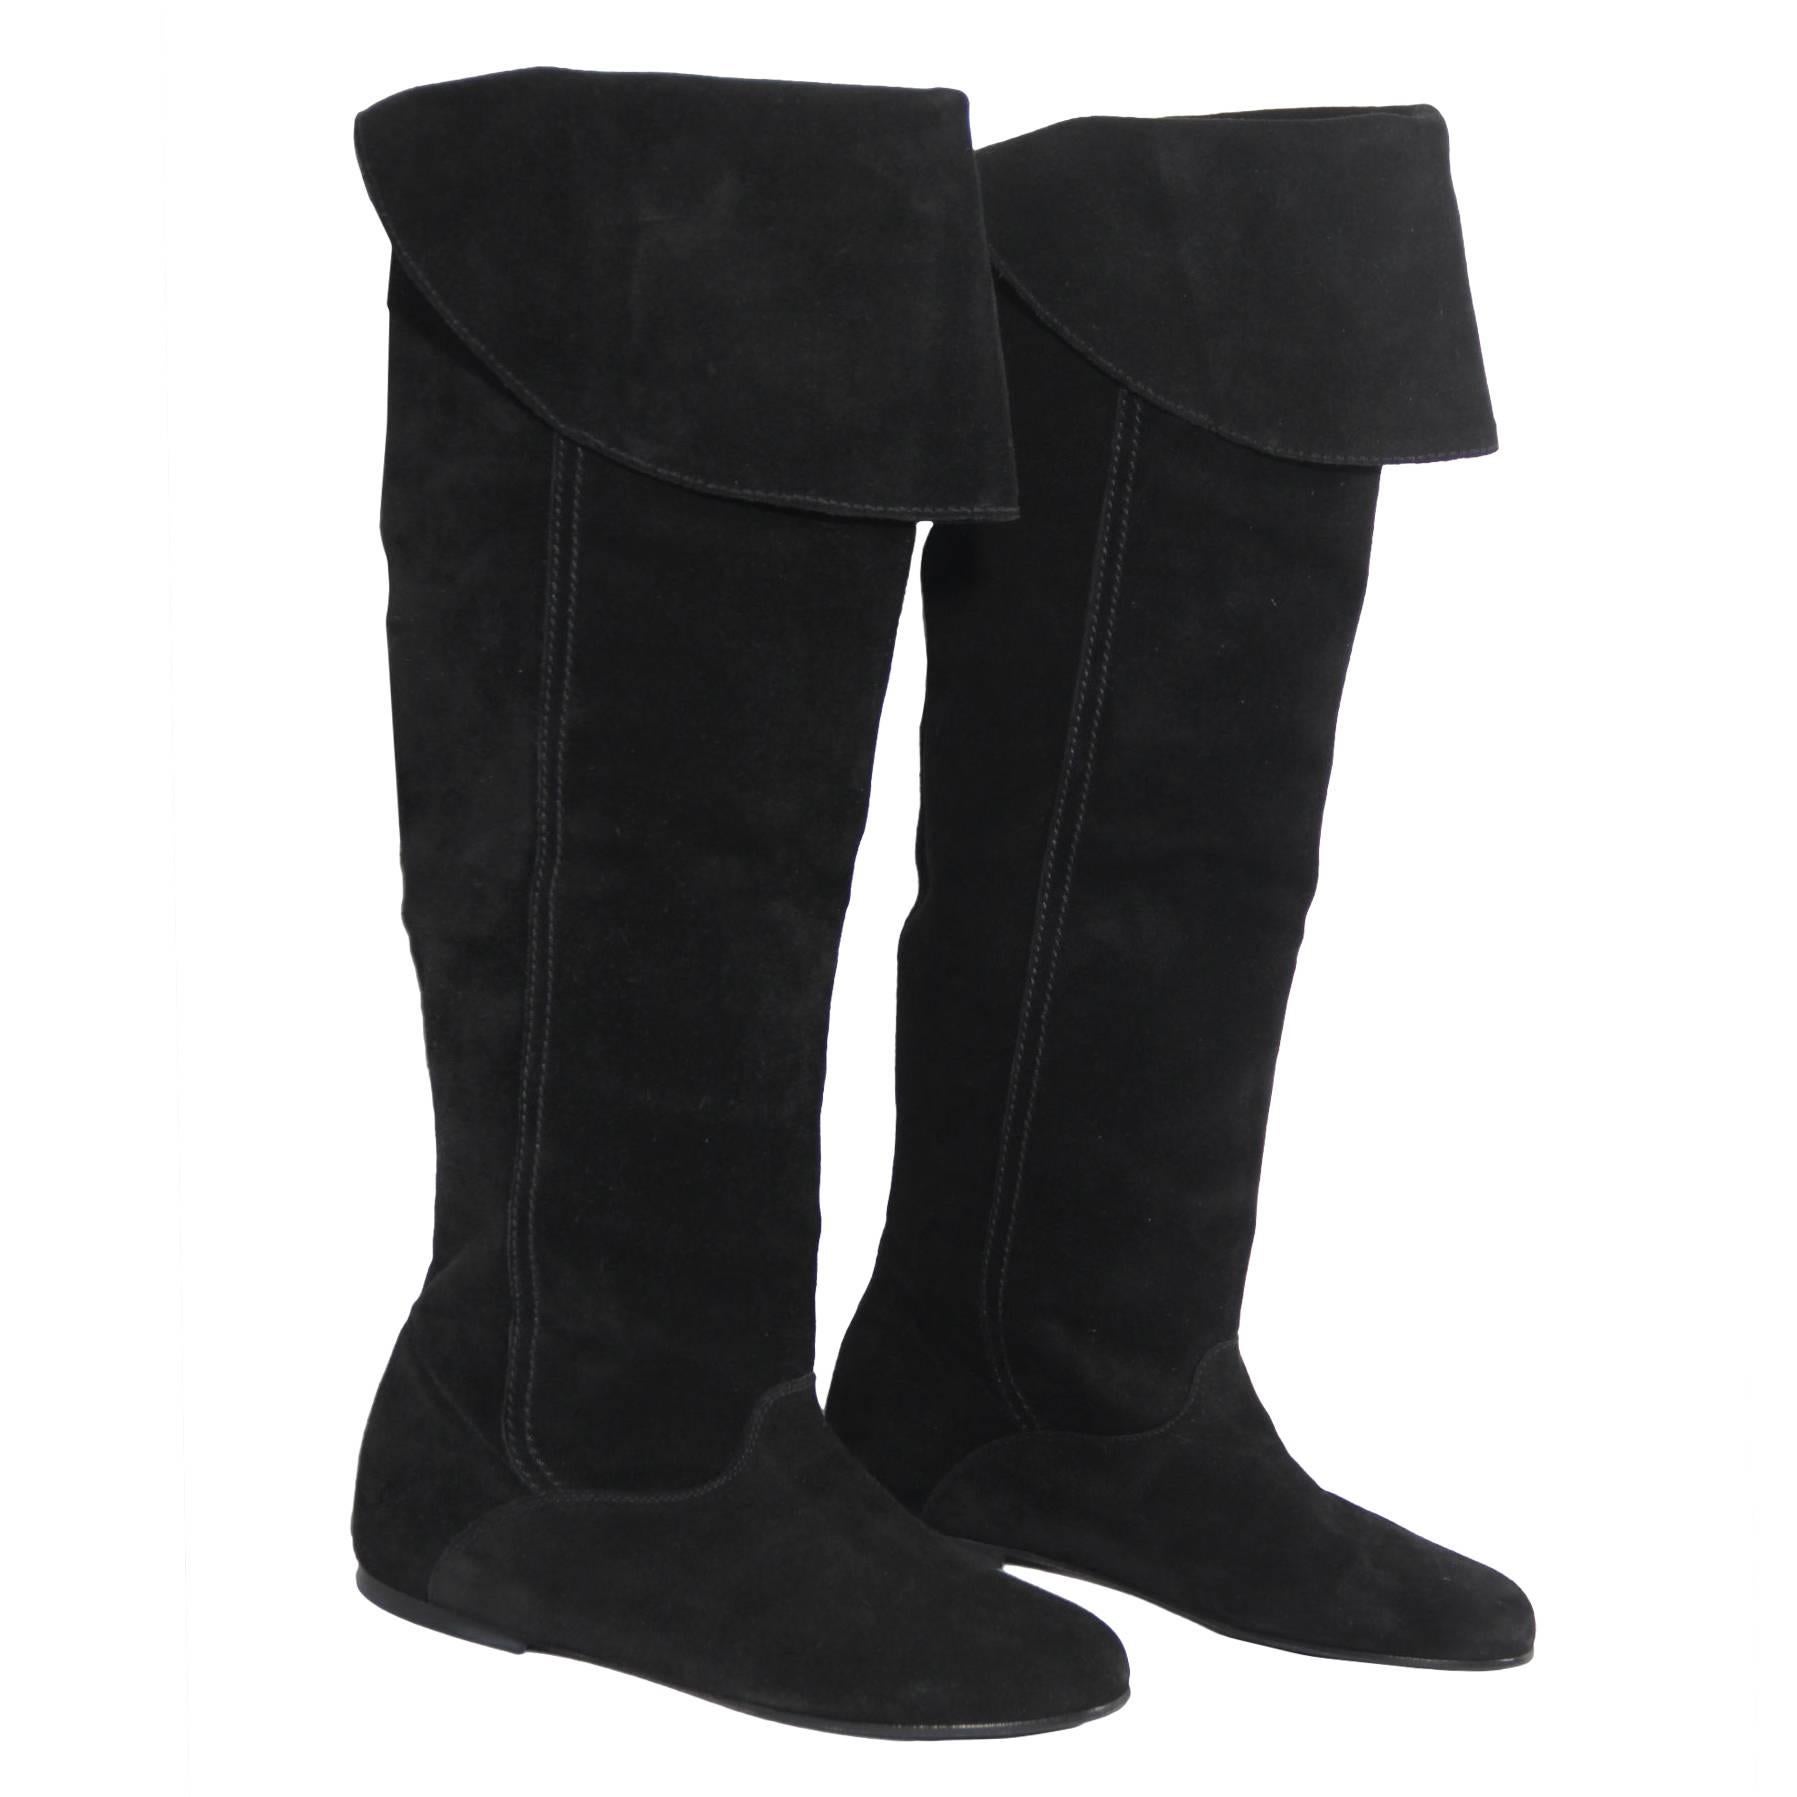 WEEKEND by MAX MARA Italian Black Suede FLAT Knee BOOTS Shoes SIZE 37